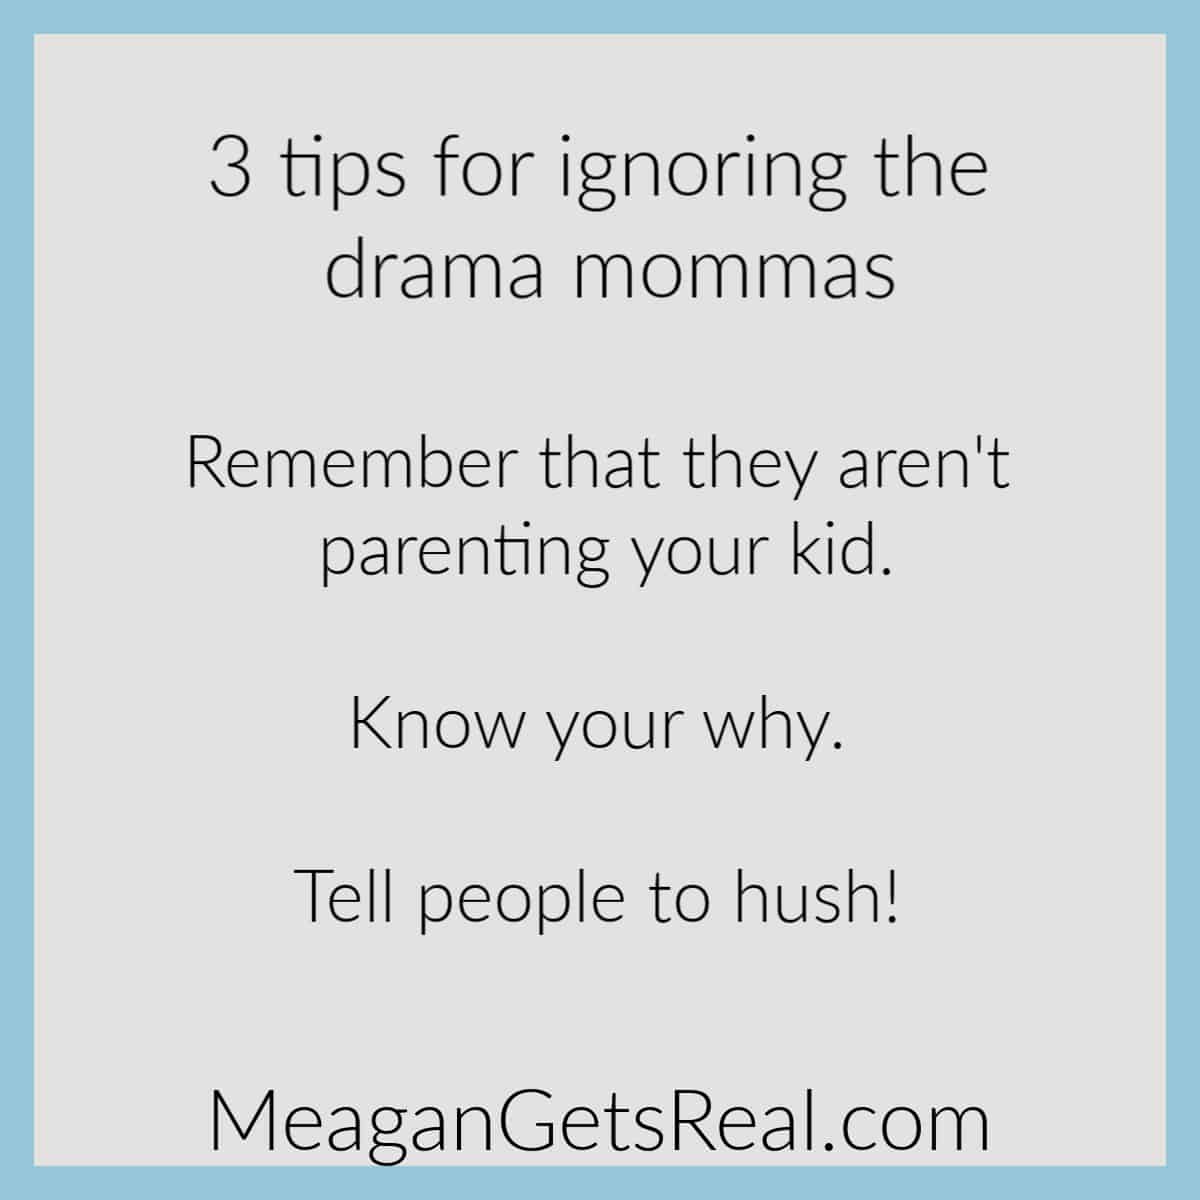 3 Tips for ignoring the drama mommas. Support for moms doesn't have to be hard to find with this comprehensive guide filled with parenting resources for moms you won't want to miss.